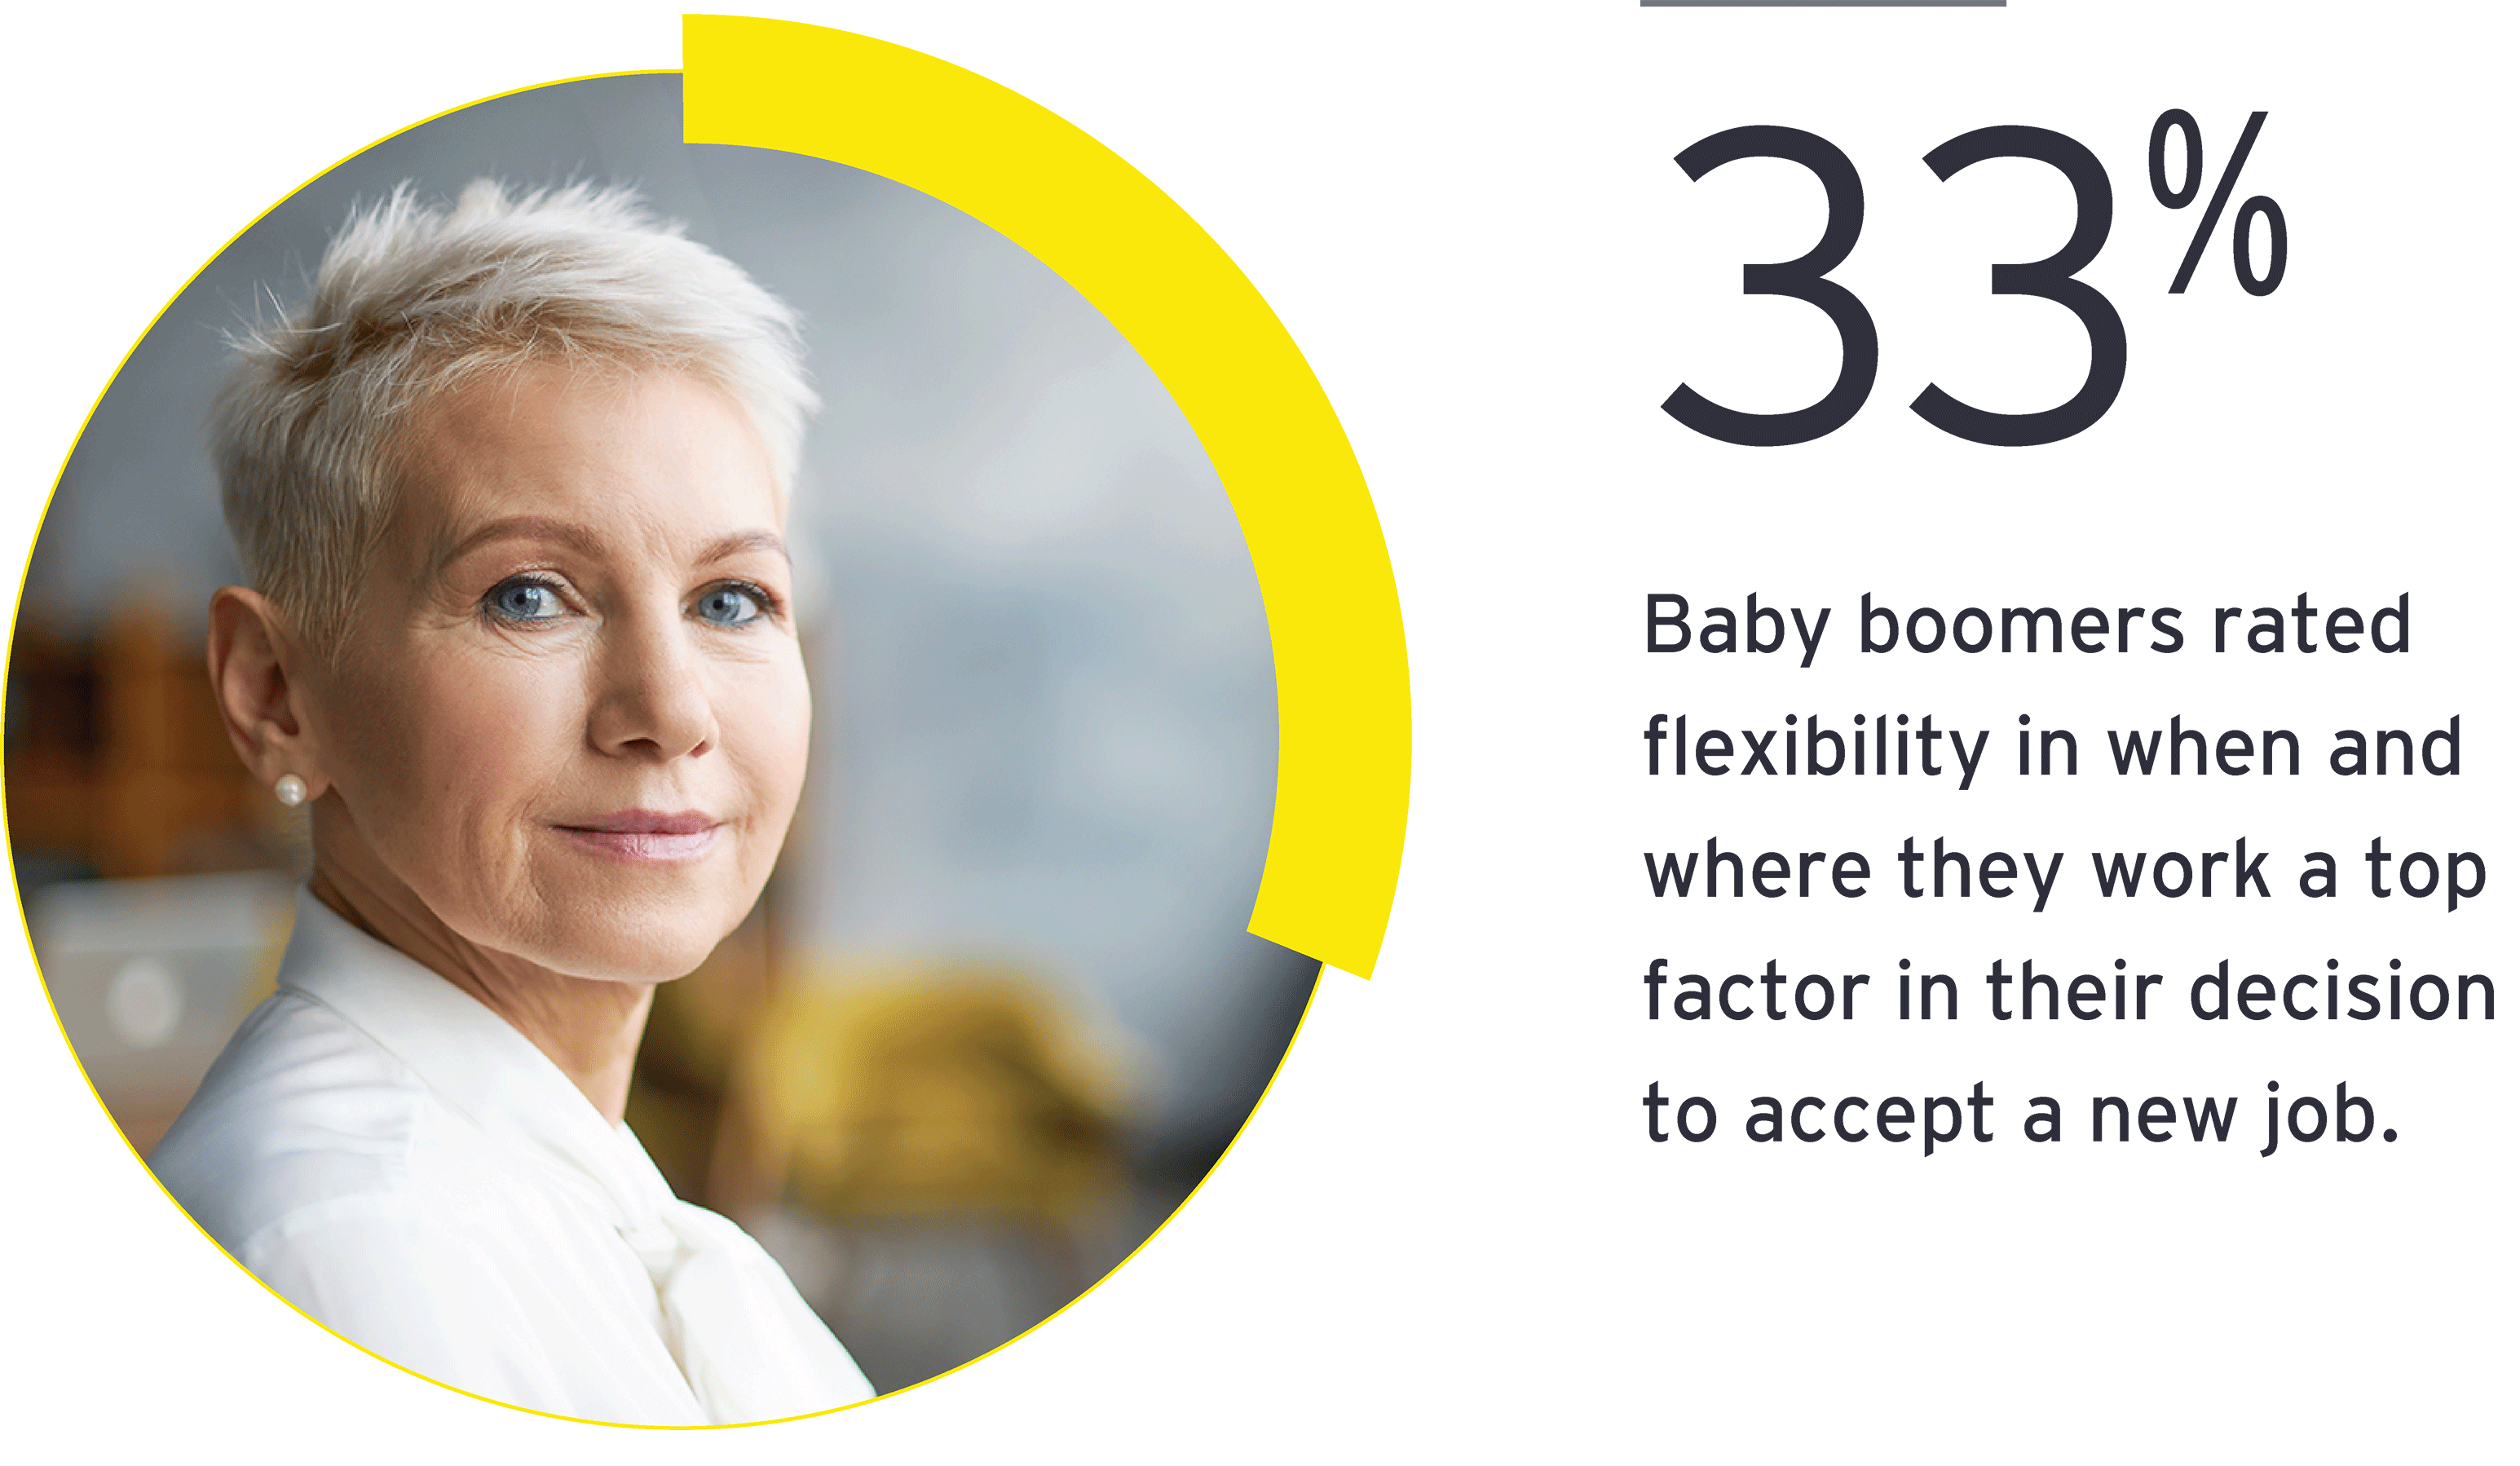 33% of baby boomers rated flexibility in when and where they work a top factor in their decision to accept a new job